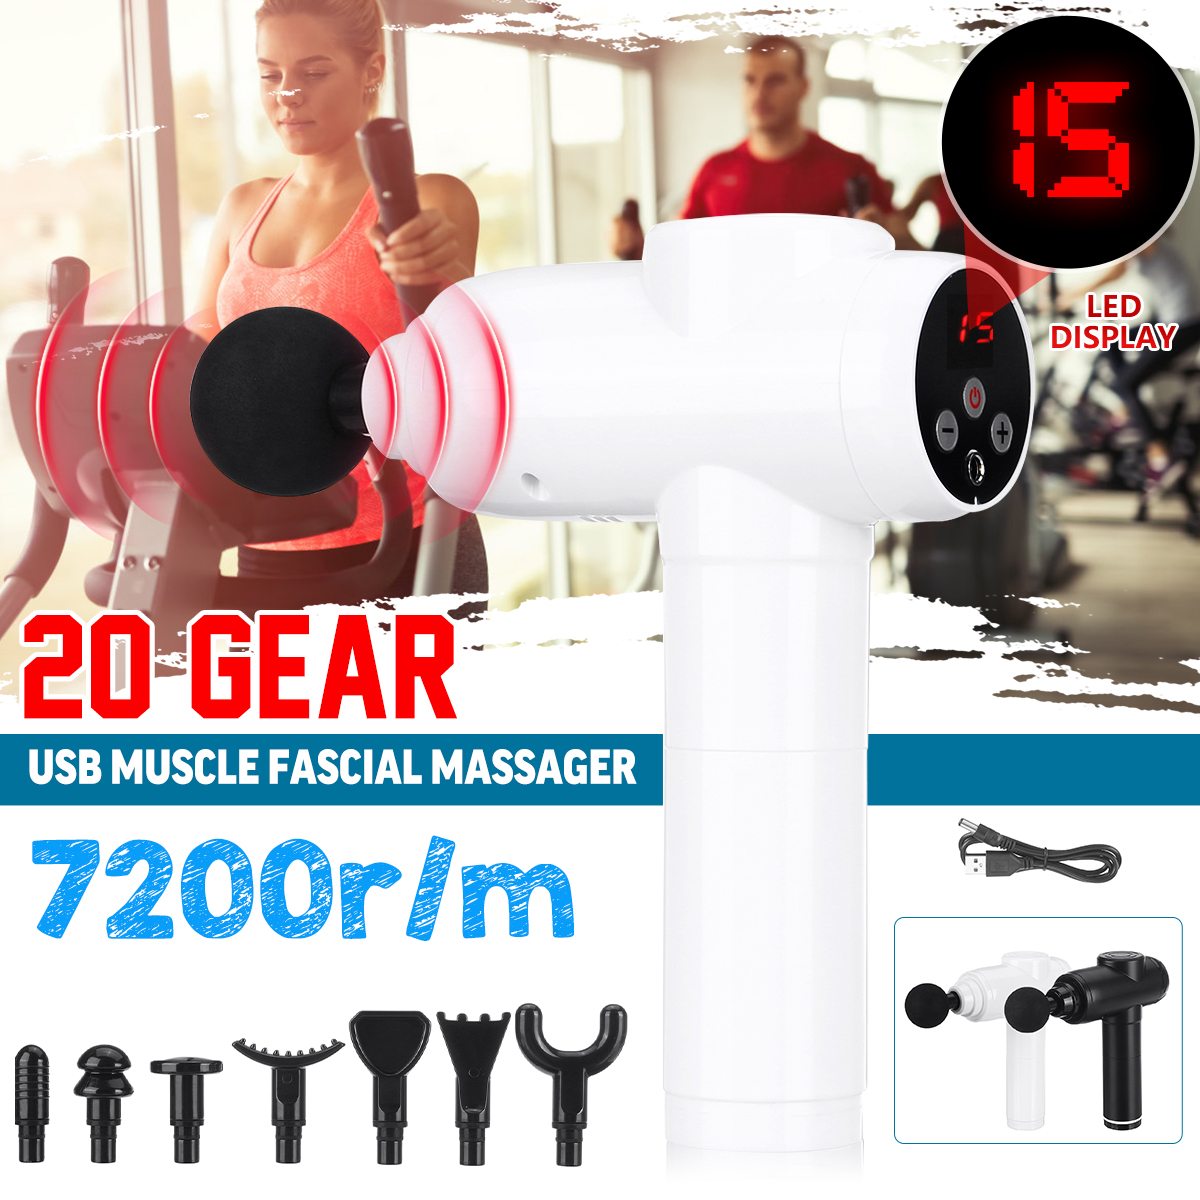 2000mAh-Electric-Muscle-Massager-USB-Rechargable-20-Speeds-With-8-Heads-Deep-Vibration-Relaxing-Ther-1712856-1